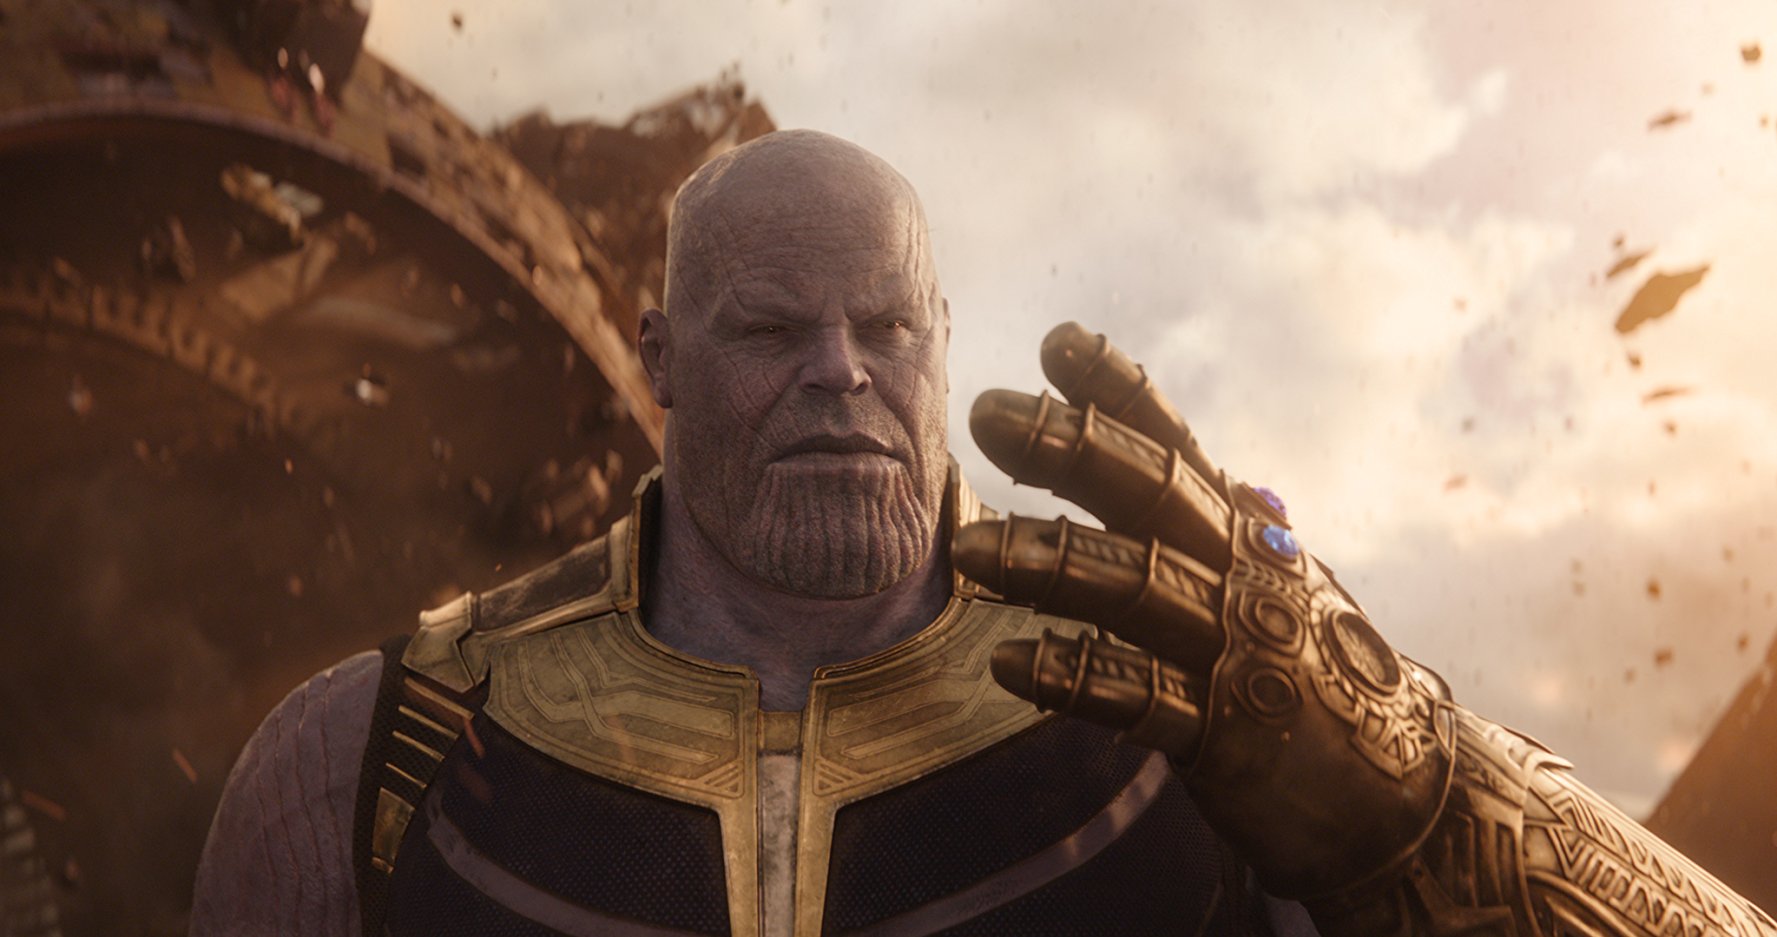 This Website Will Tell You If Thanos Killed You